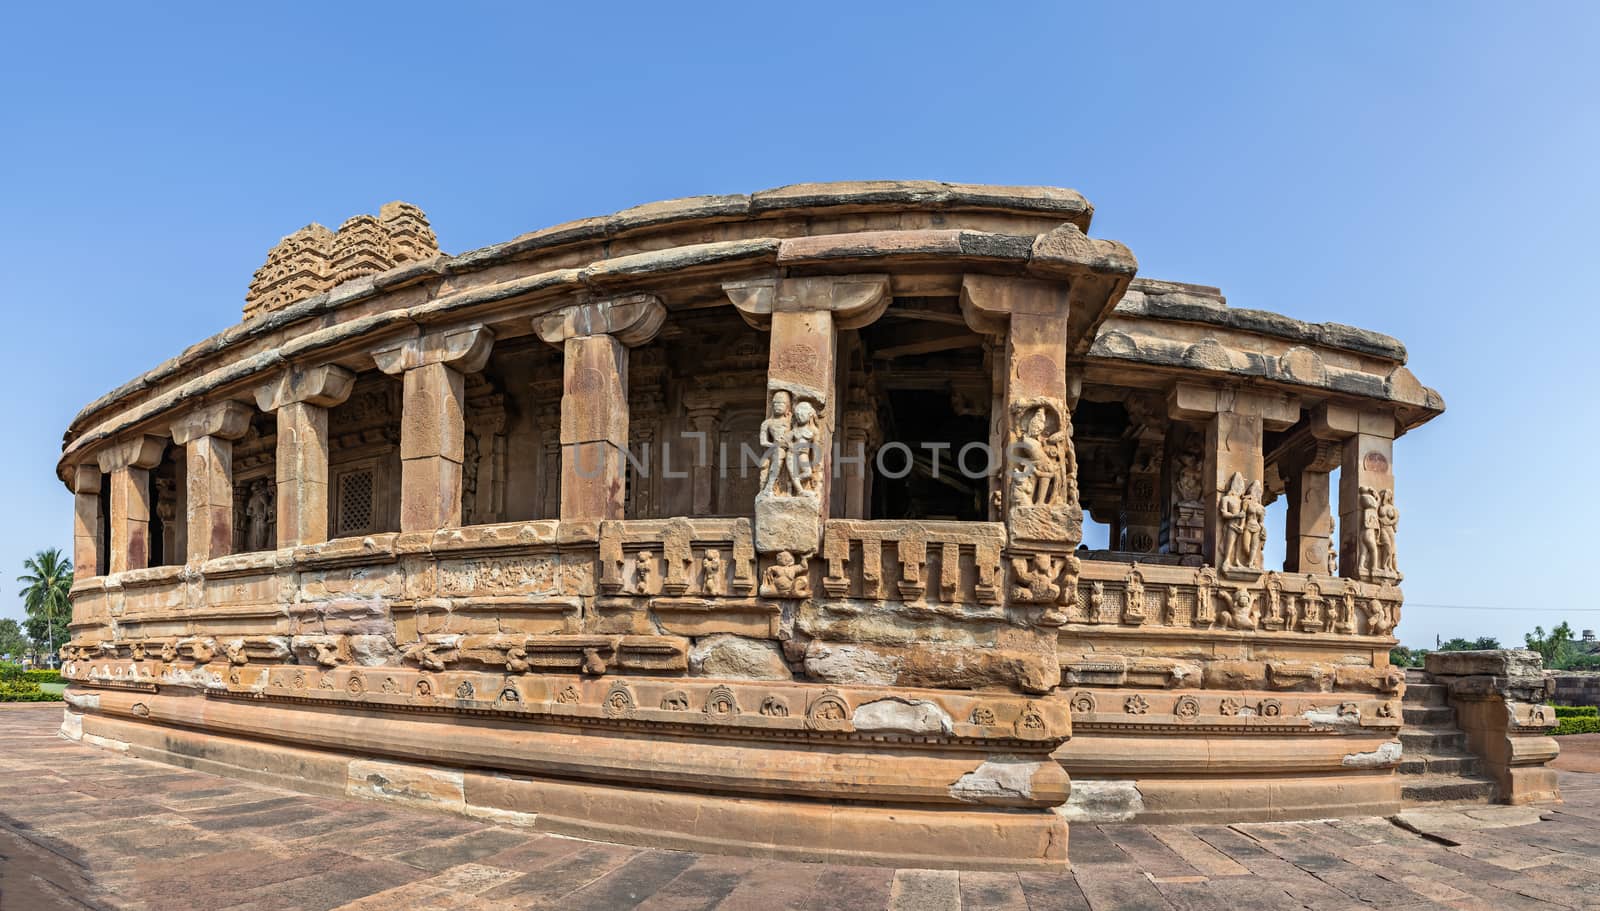 Panorama image of Durga temple in Aihole, Karnataka, India. The temple is constructed in the sixth century. It is built in the Buddhist chaitya style but it has a corridor running on all three sides.